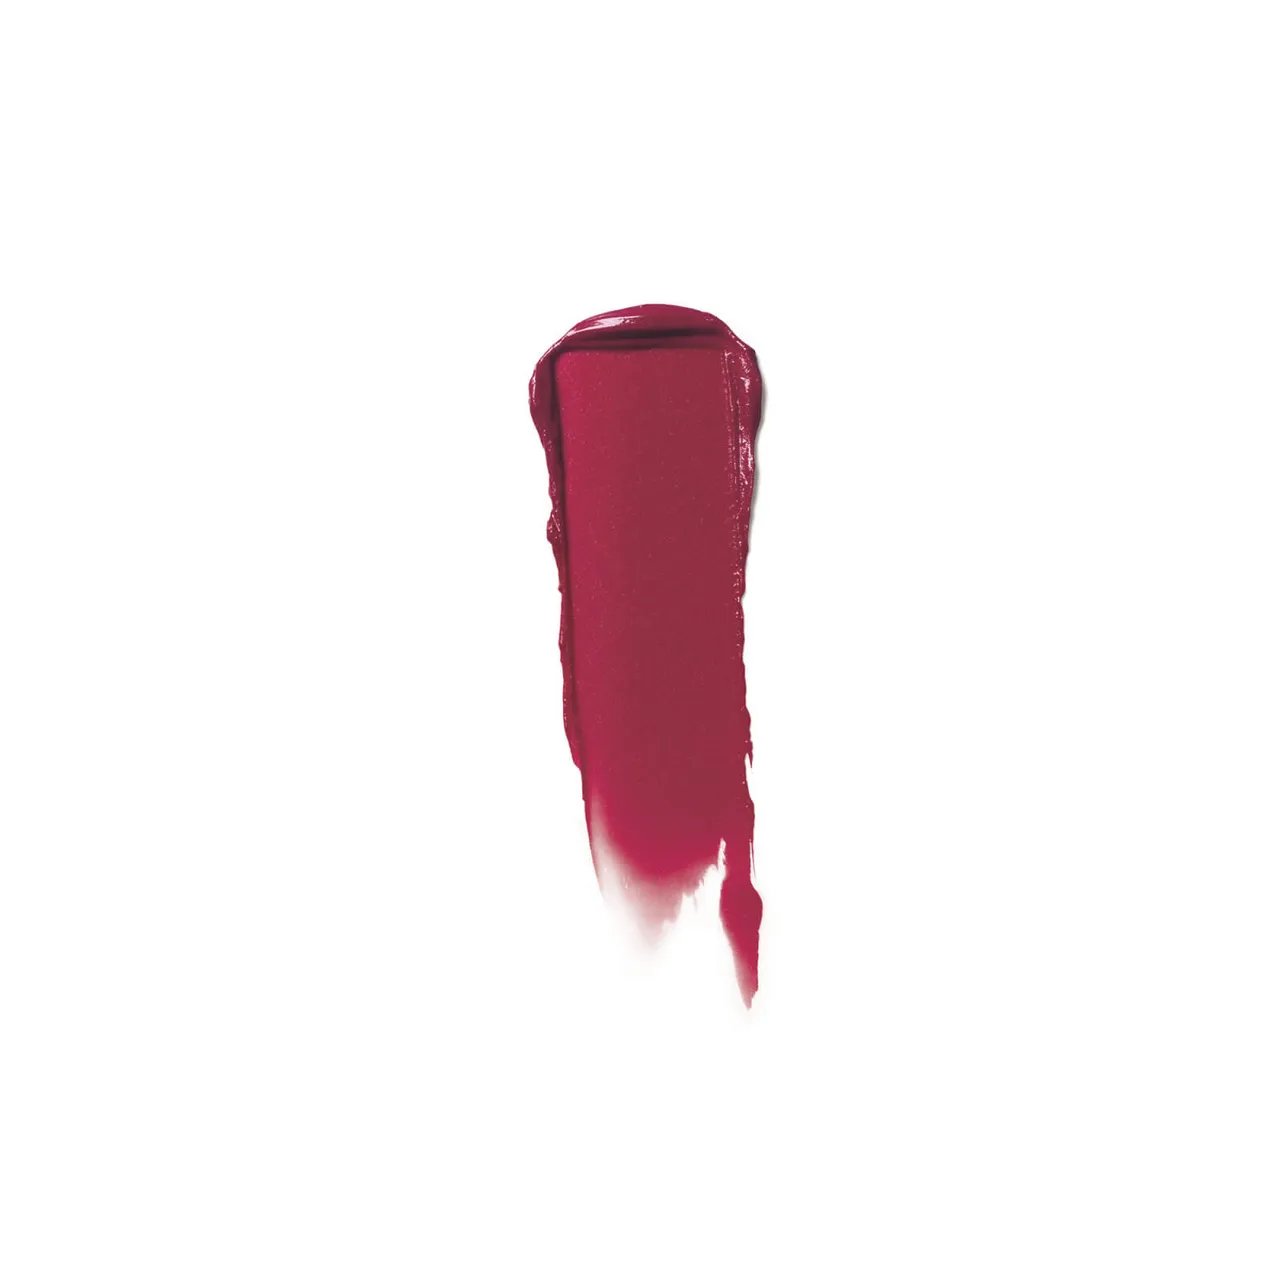 Clinique Chubby Stick 3g (Various Shades) - Broadest Berry